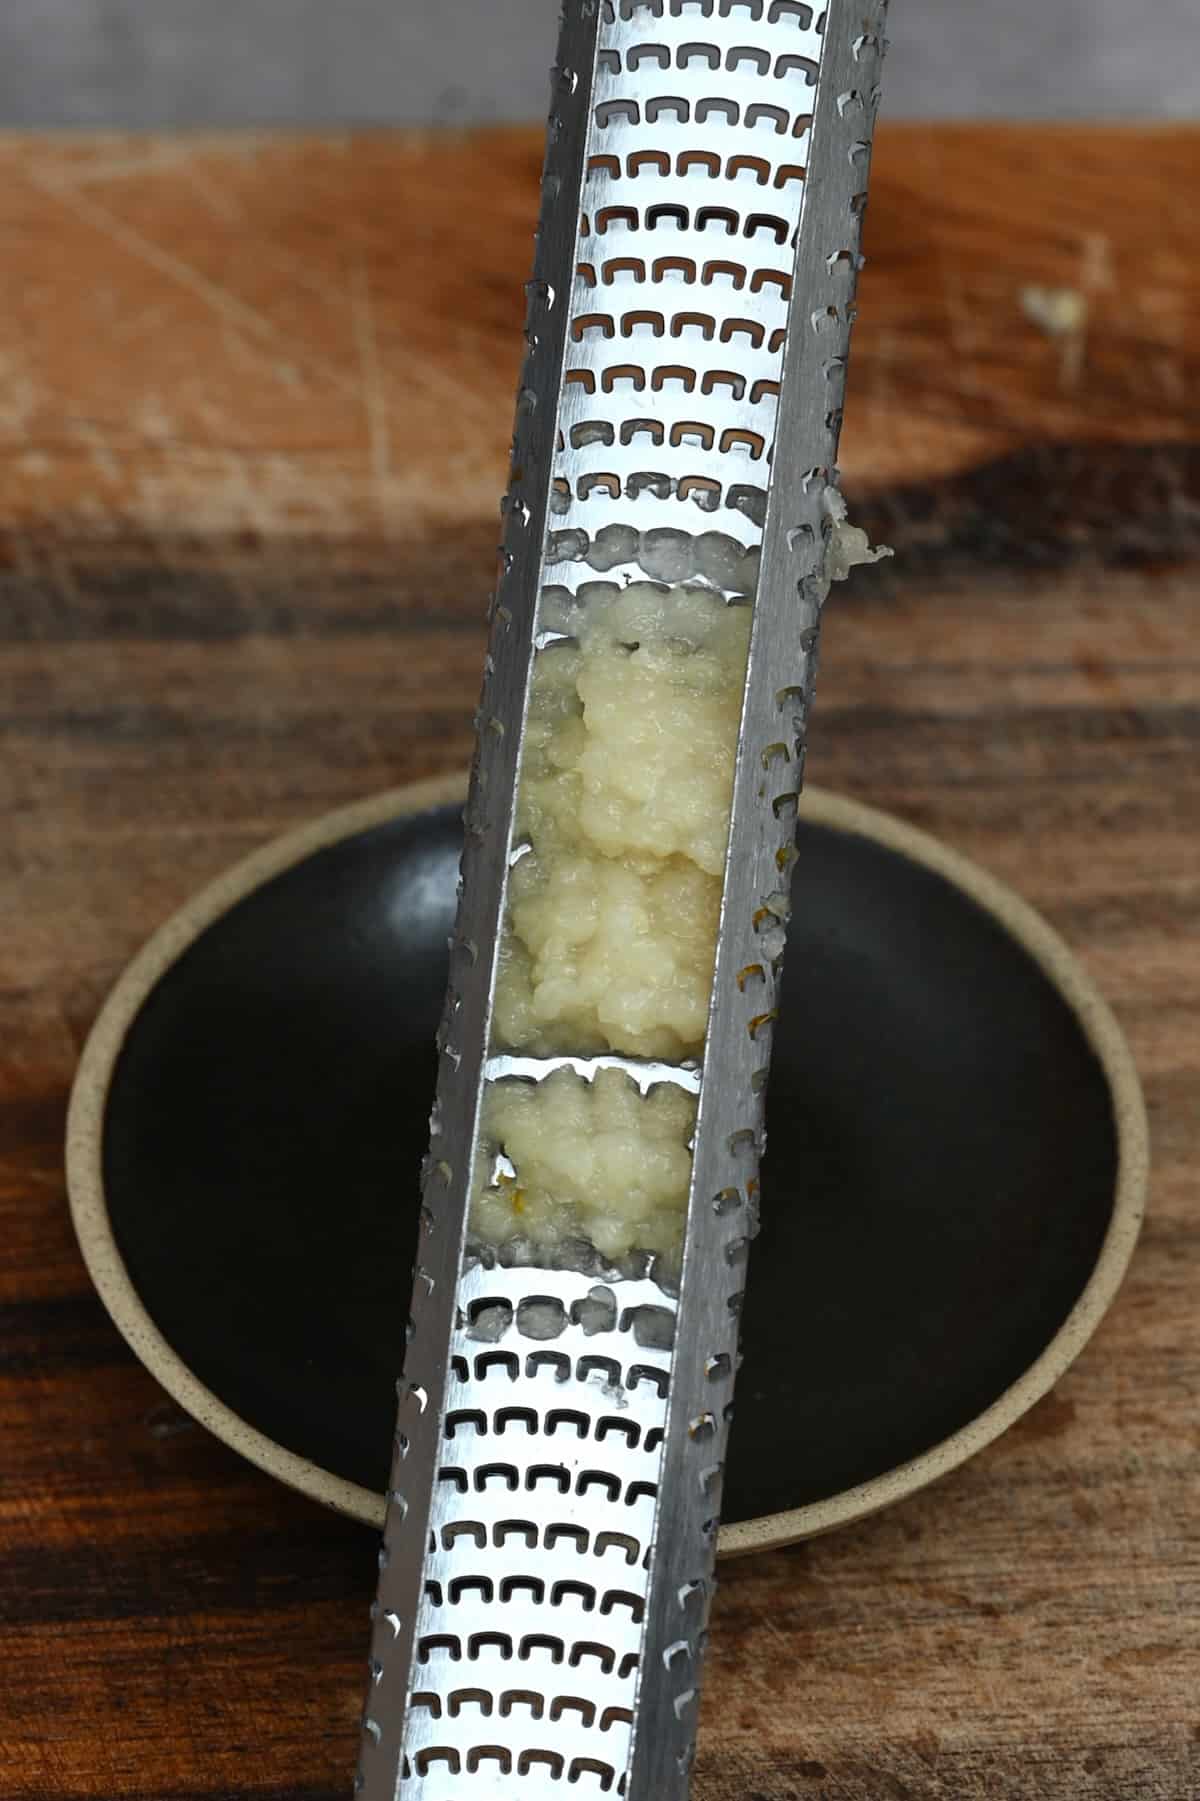 https://www.alphafoodie.com/wp-content/uploads/2022/11/Garlic-Guide-Garlic-grated-on-a-microplane.jpeg